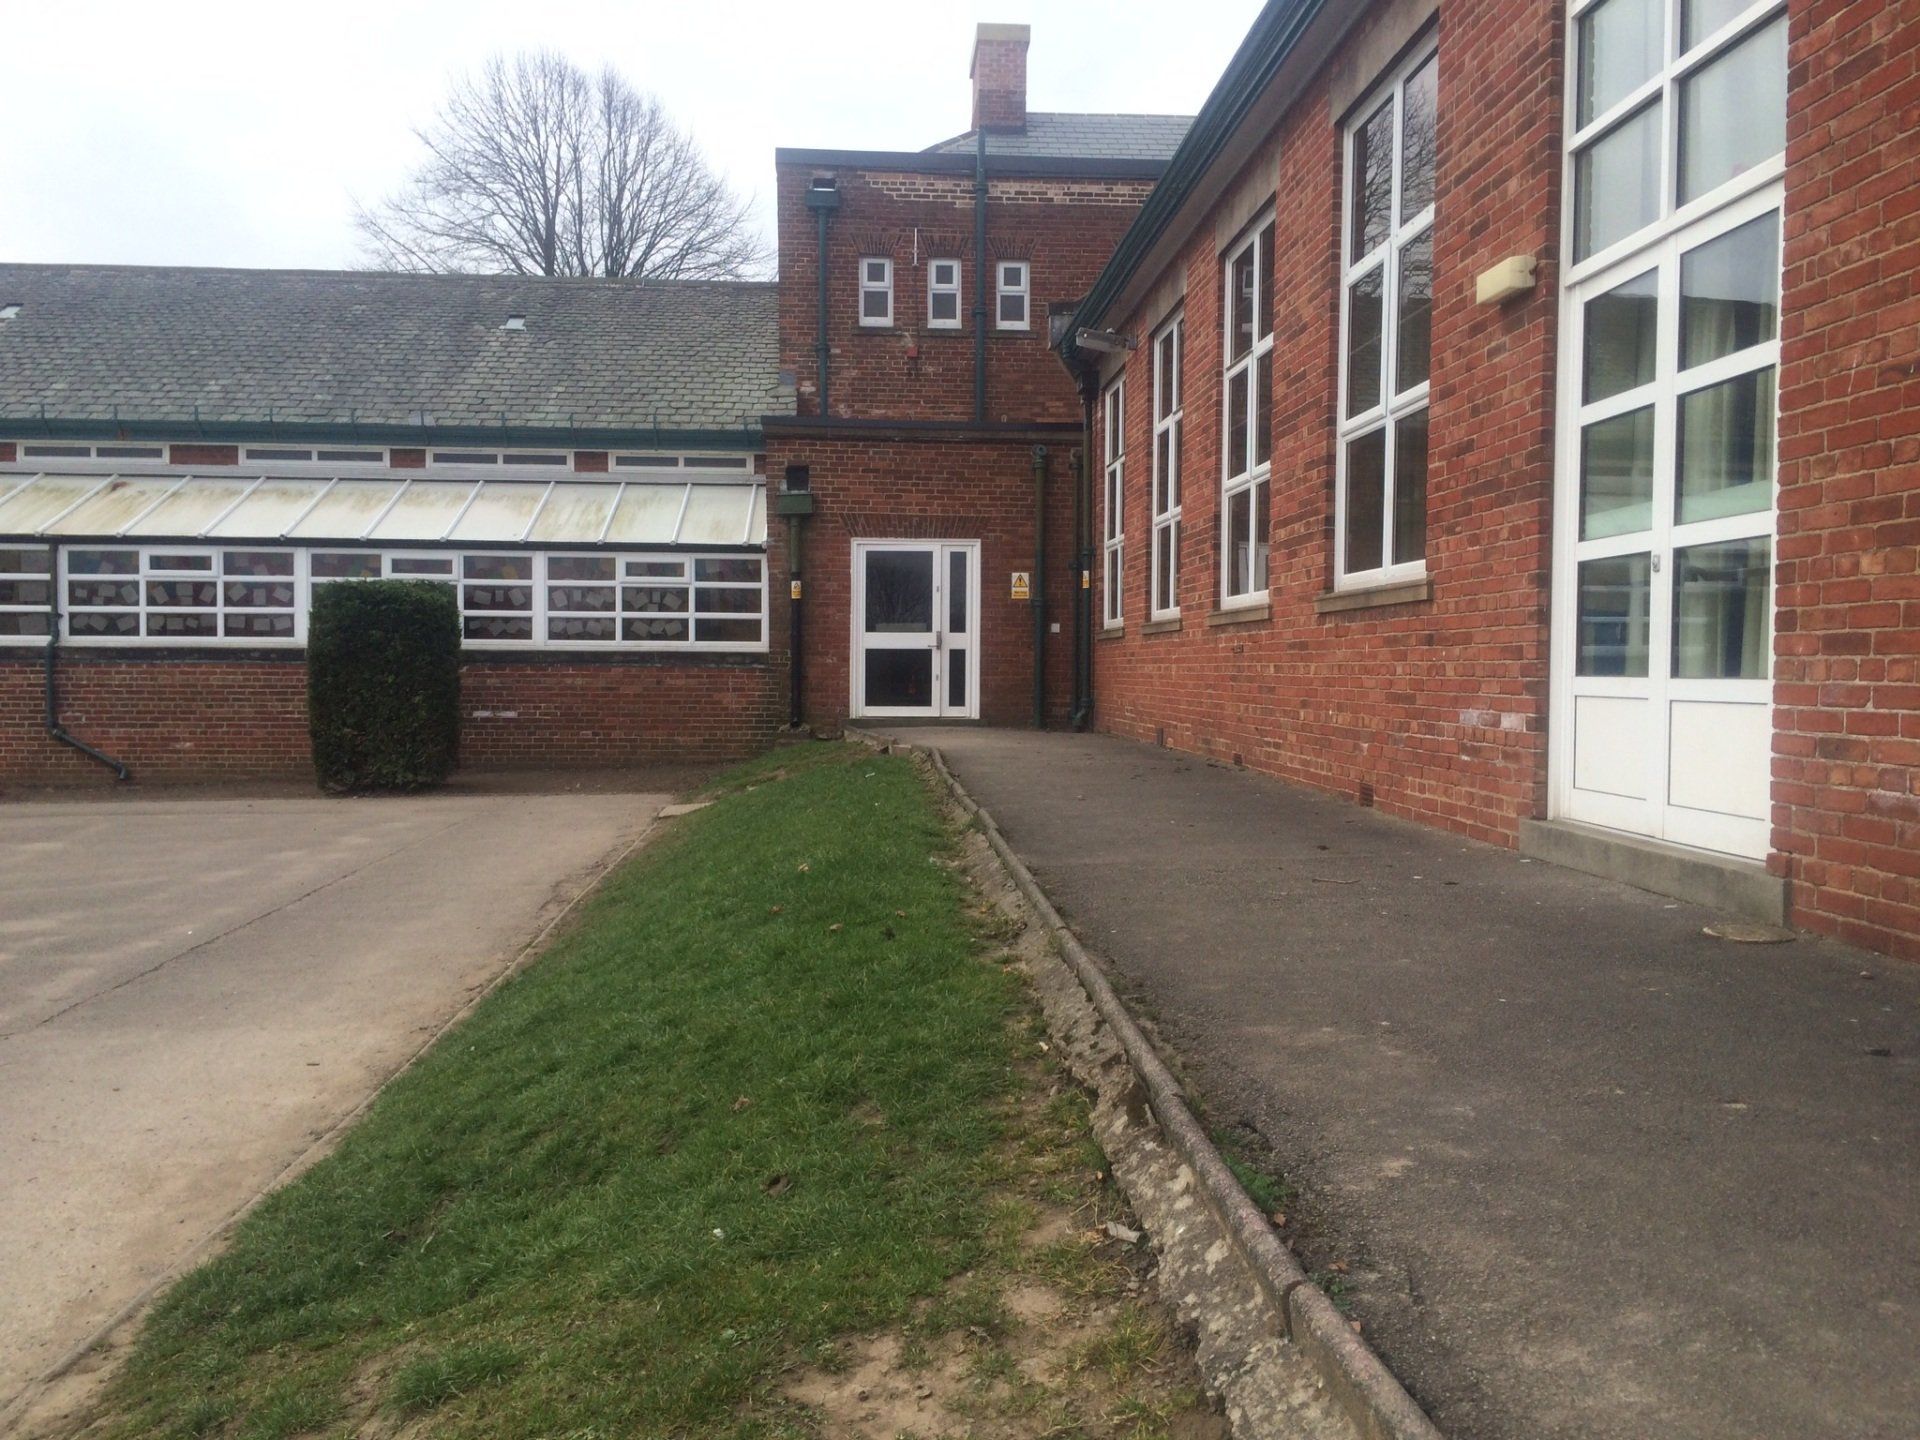 Disabled Access at a School Before